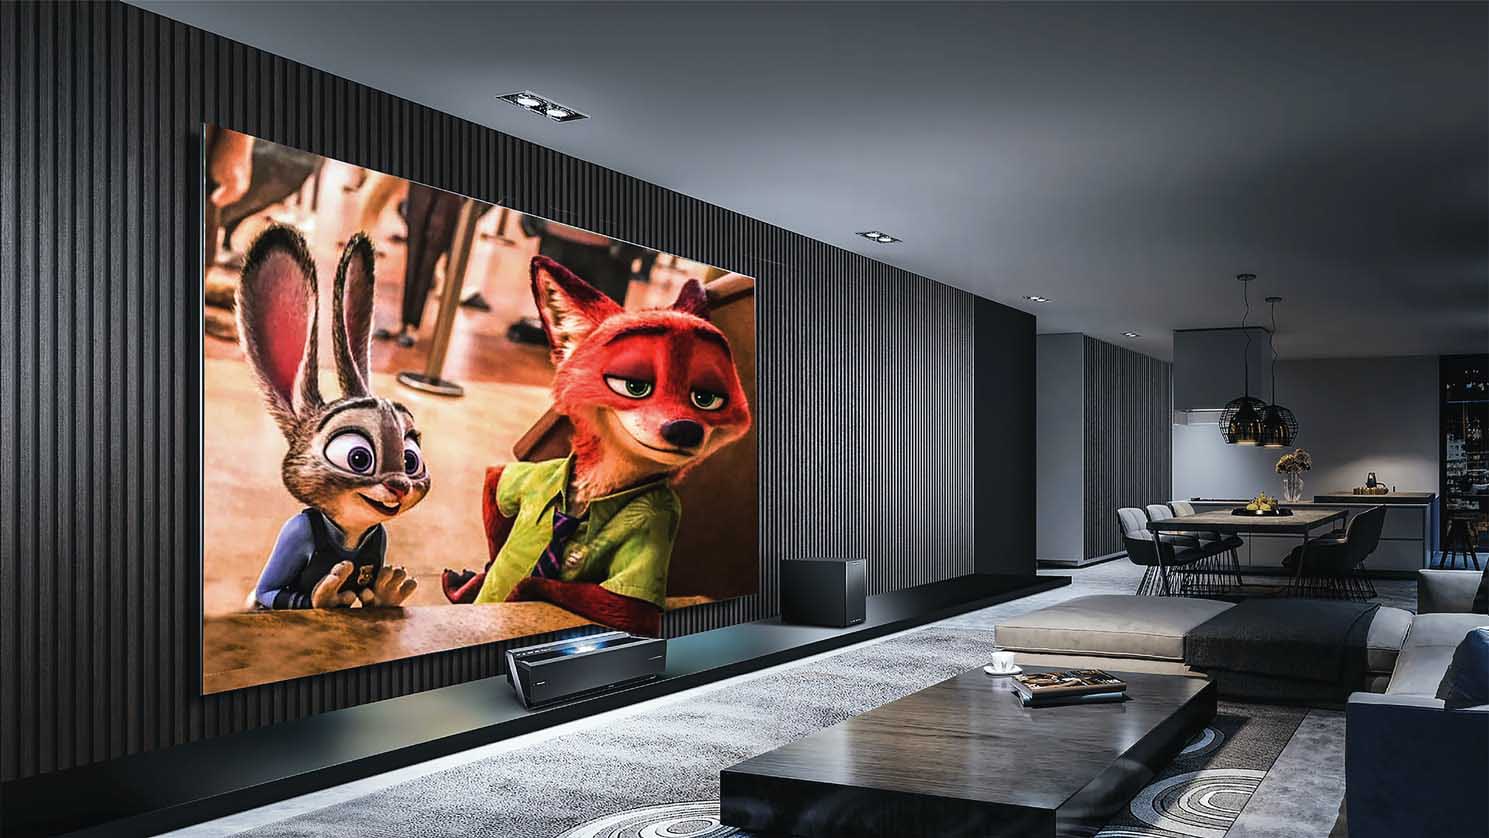 Beautifully designed Home Theater system in Dallas Texas